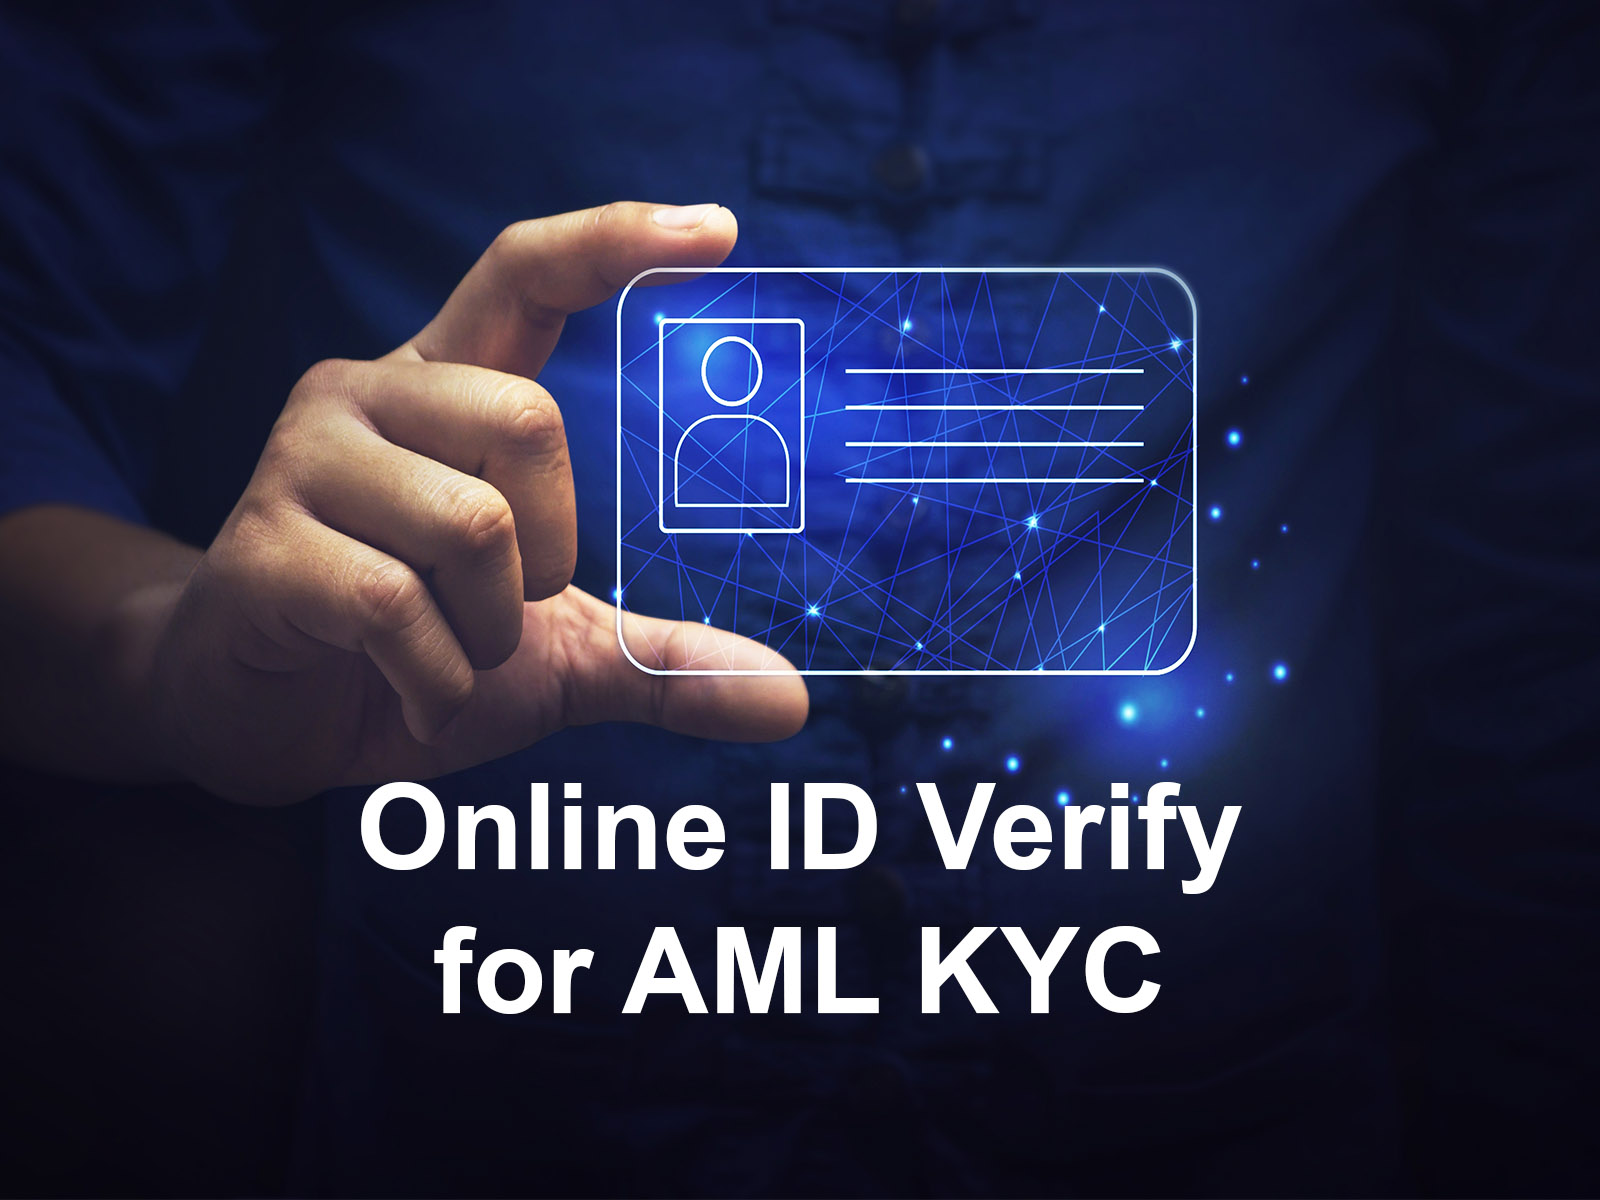 Art show text "Online ID Verify for AML KYC" with digital concept ID card in a hand. Art for AML KYC software and basics of online ID verification for AML Compliance and KYC CDD.